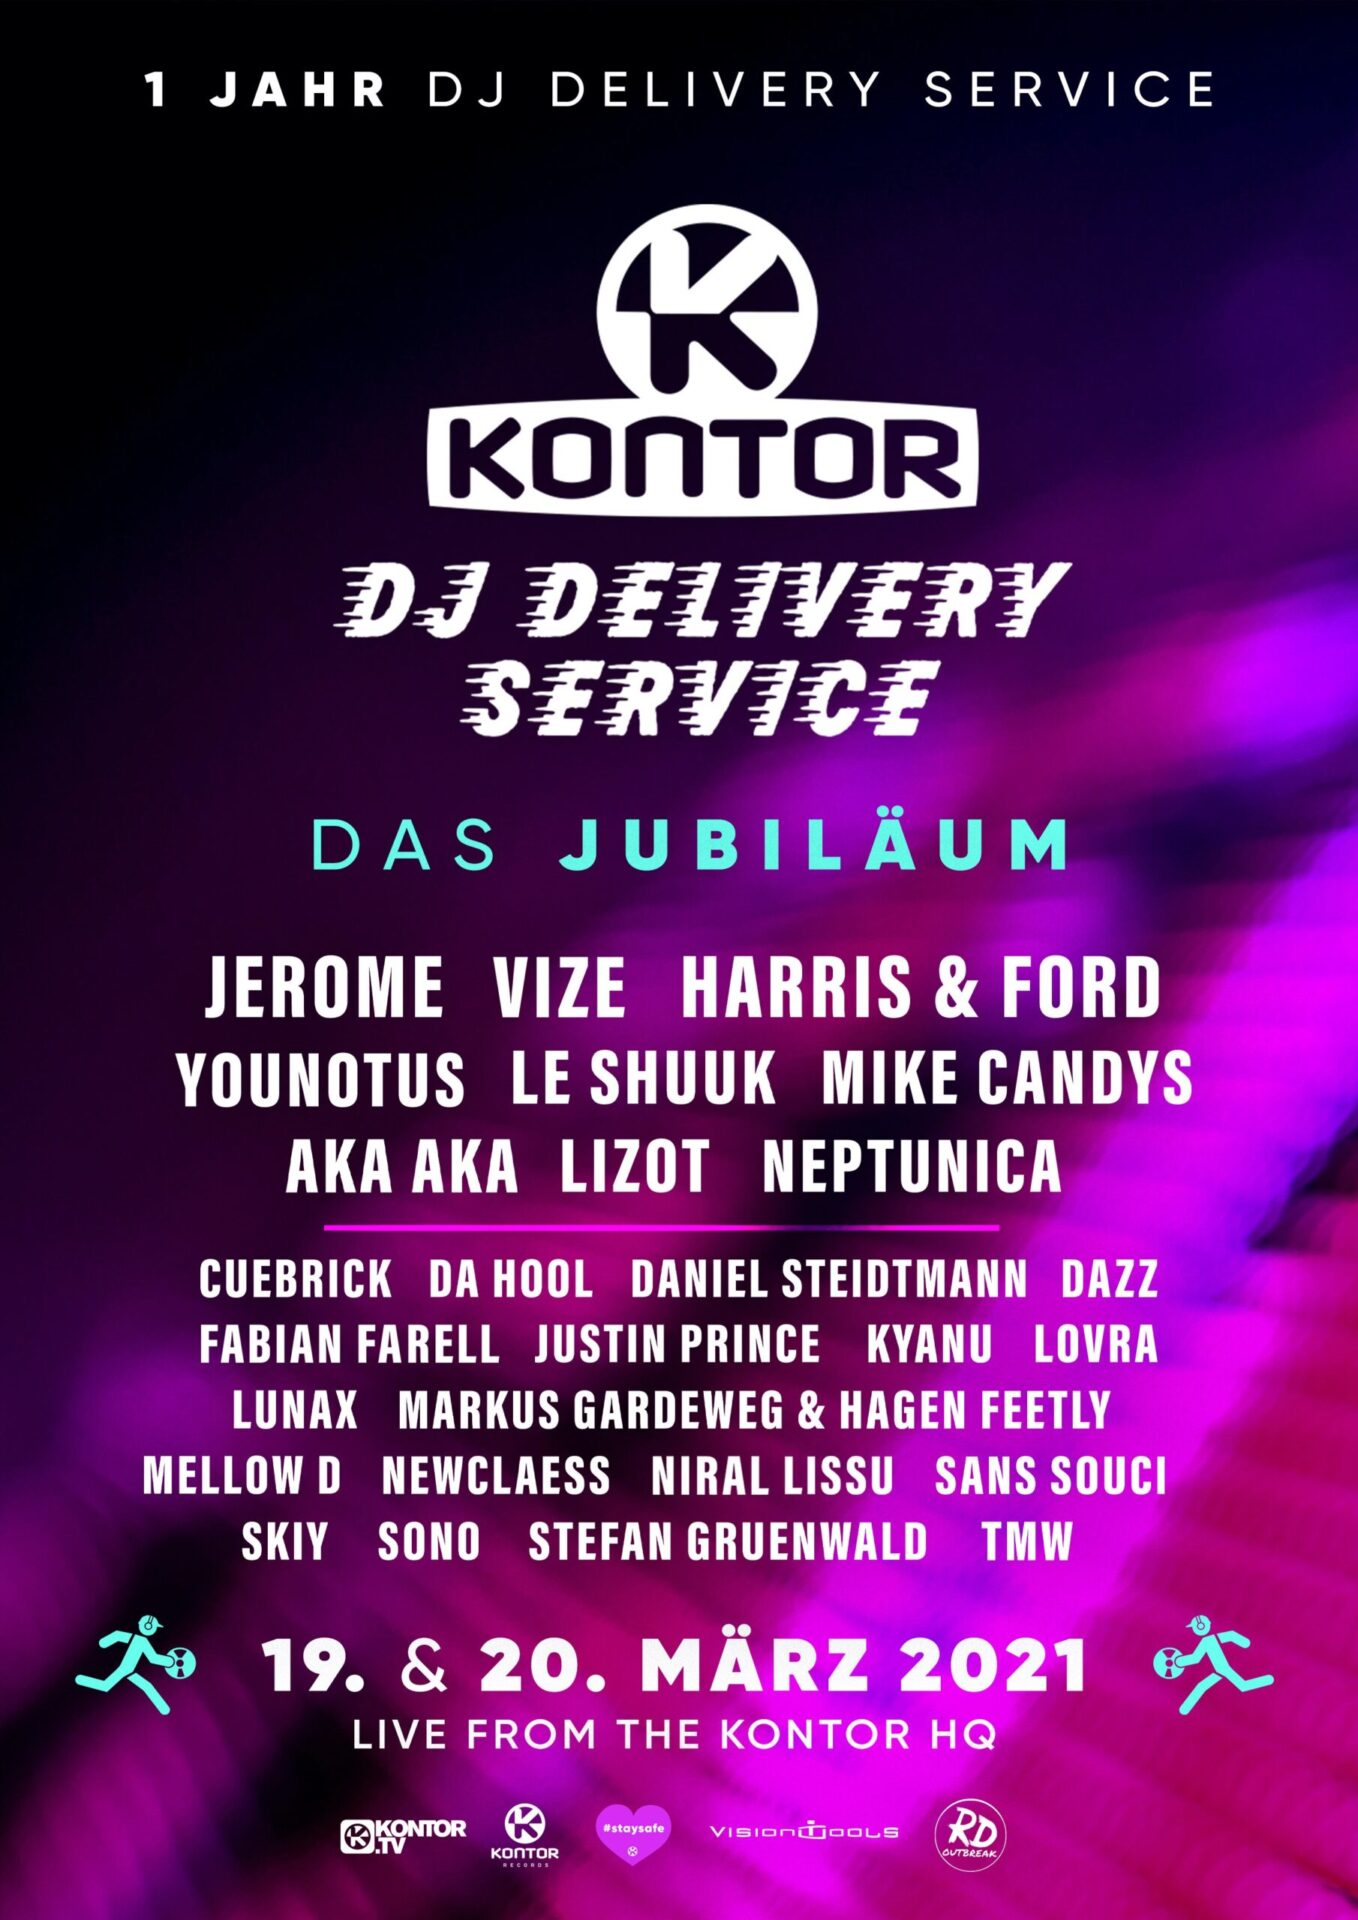 One Year On: Kontor DJ Delivery Service